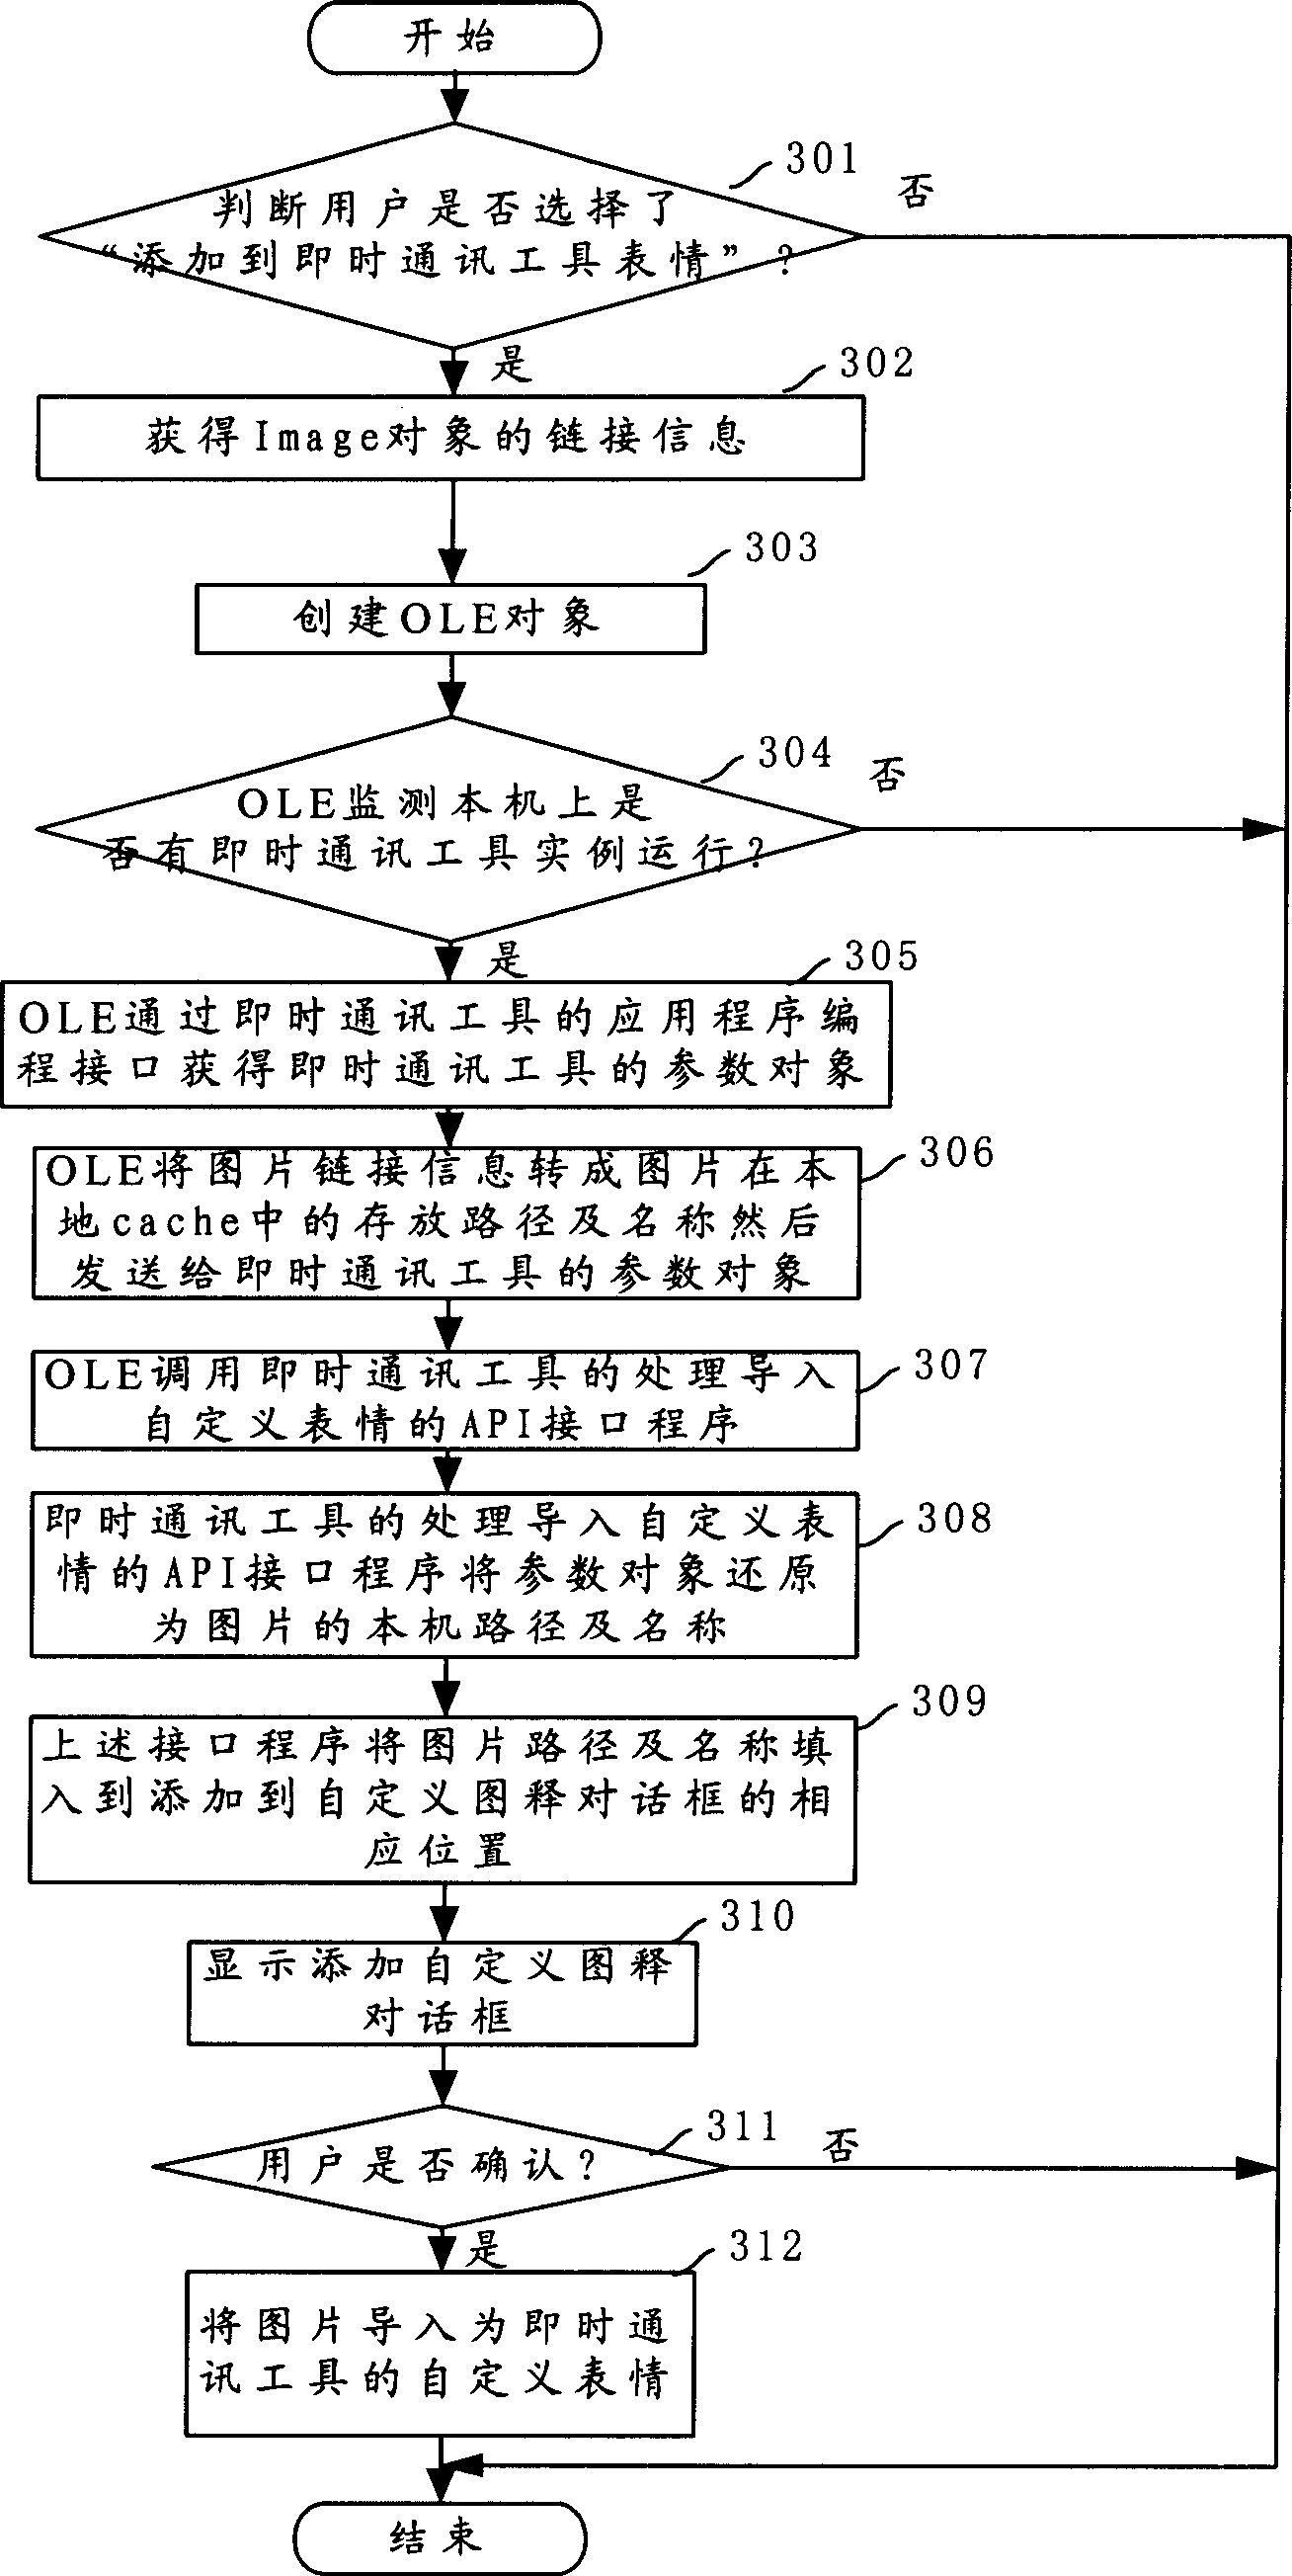 Method of making network page picture directly apply to instant communication tool